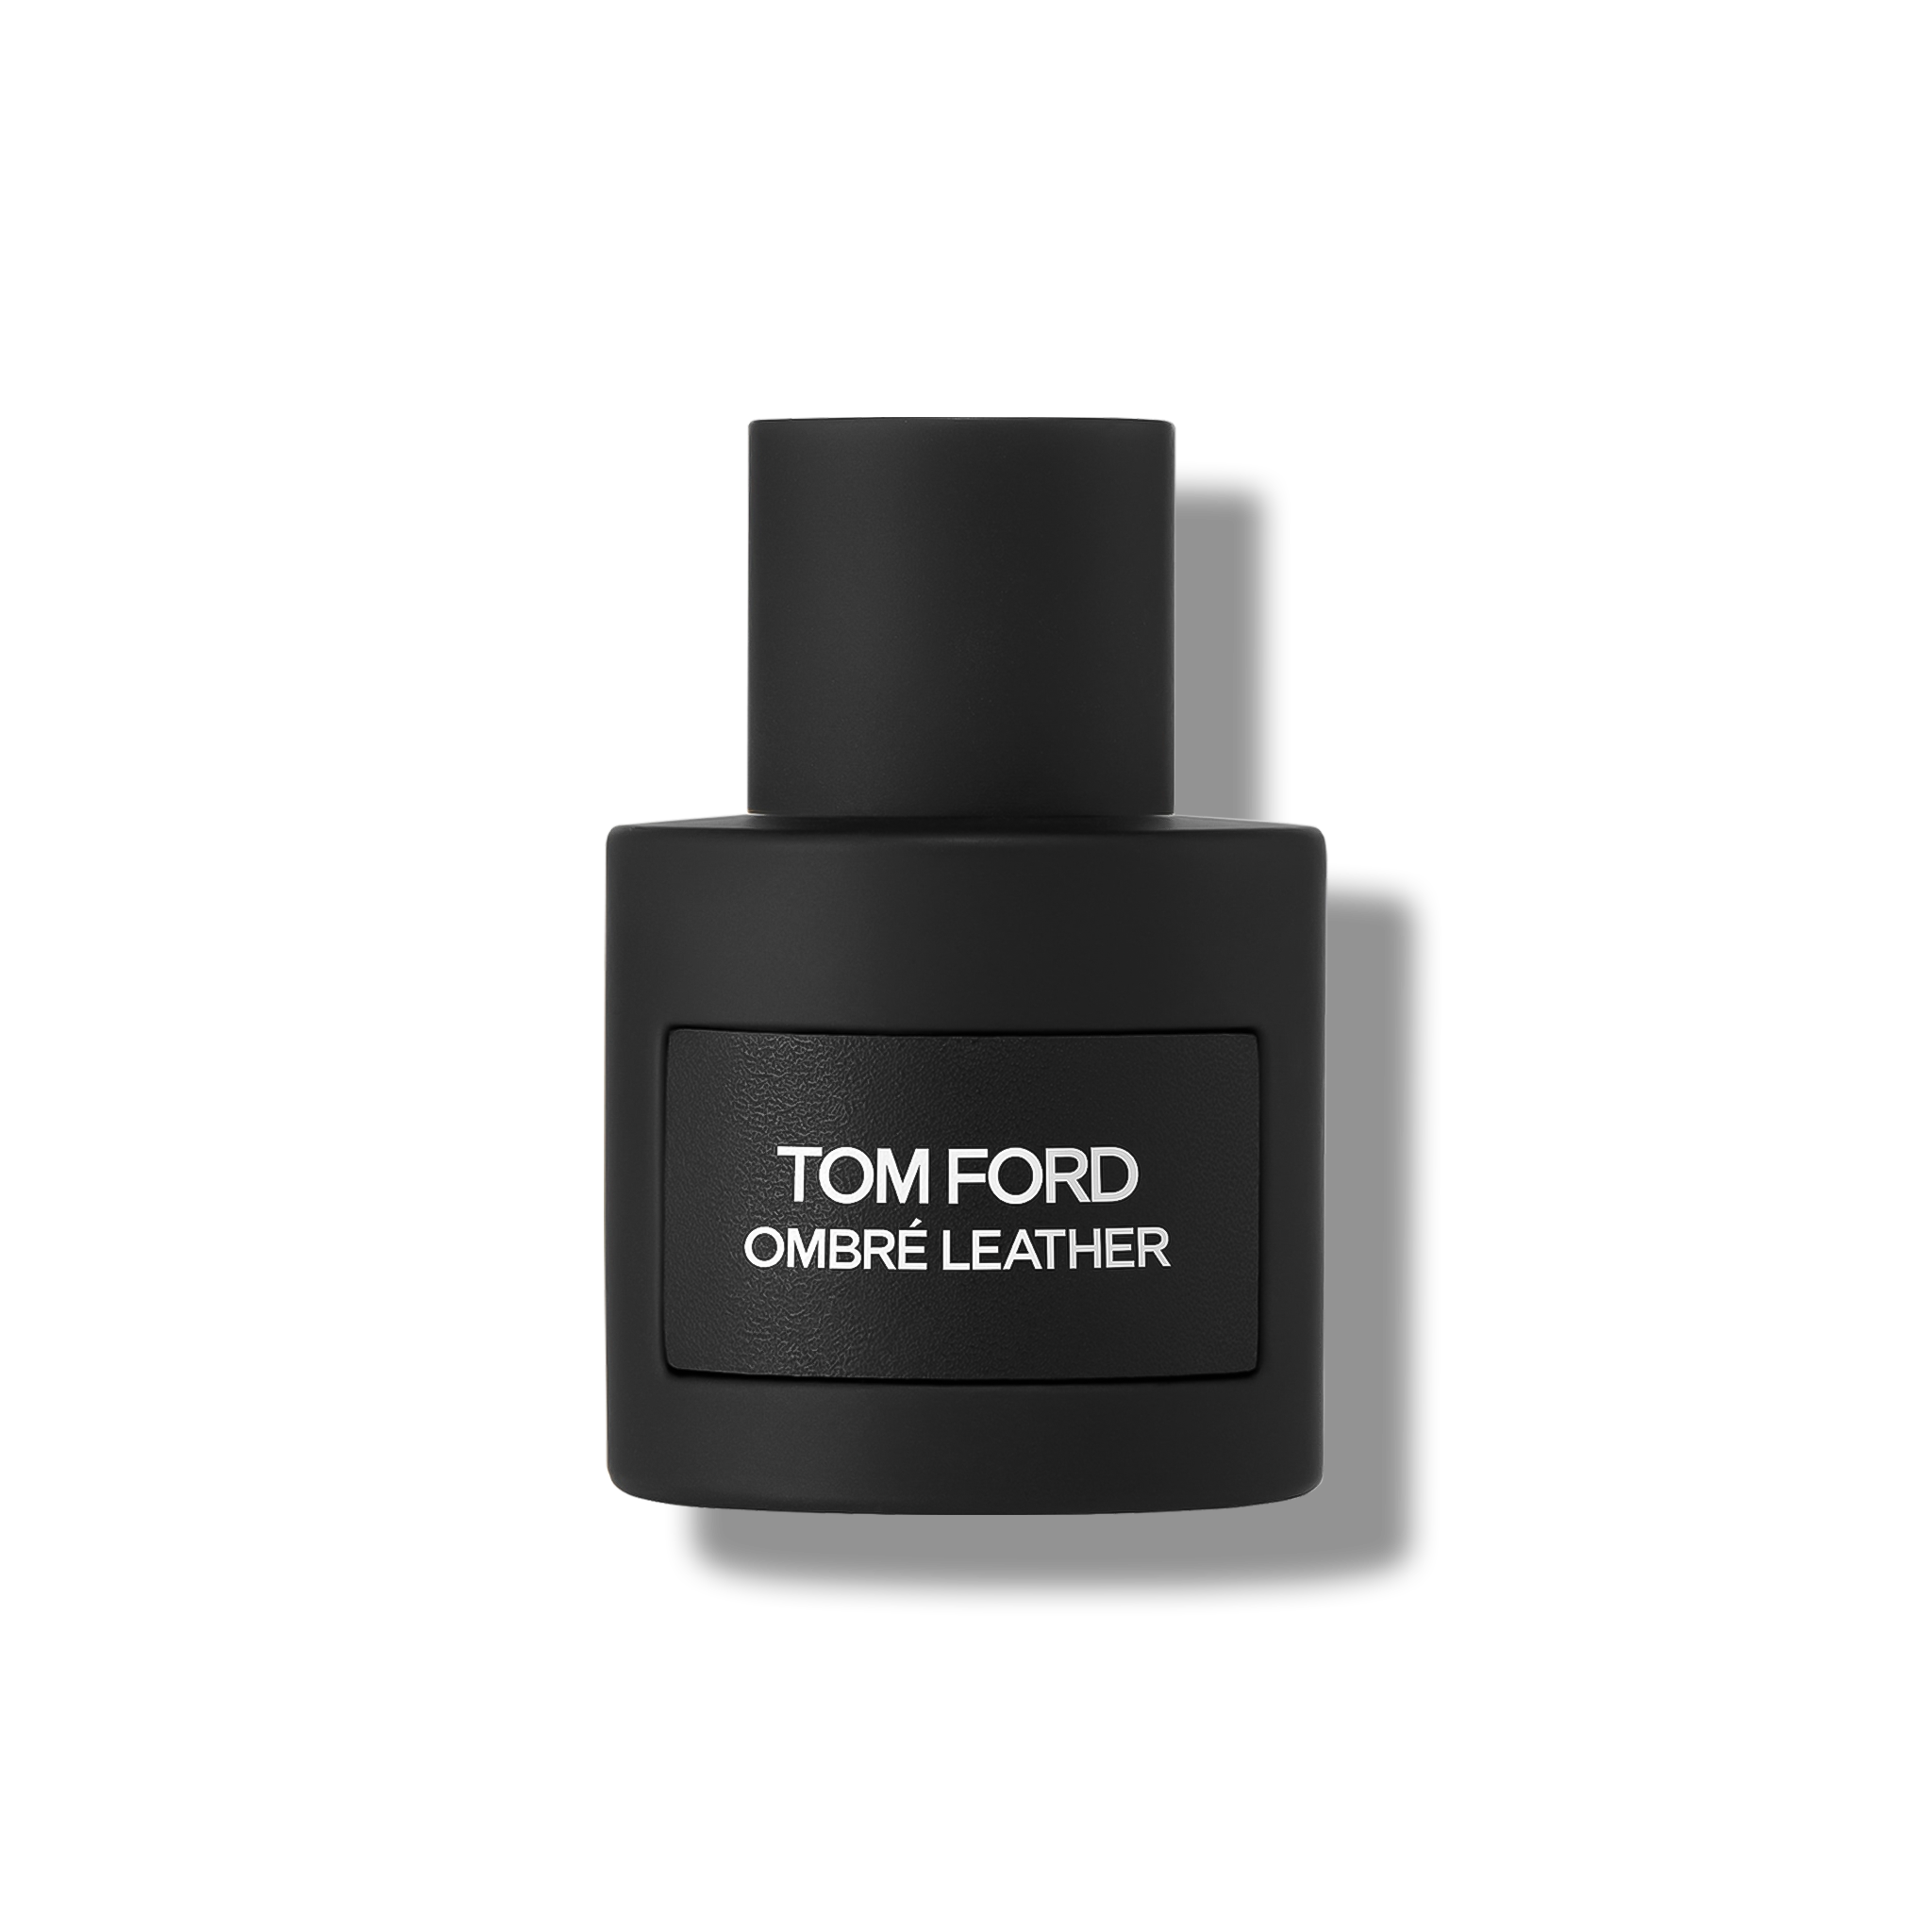 tom-ford-ombre-leather-edp